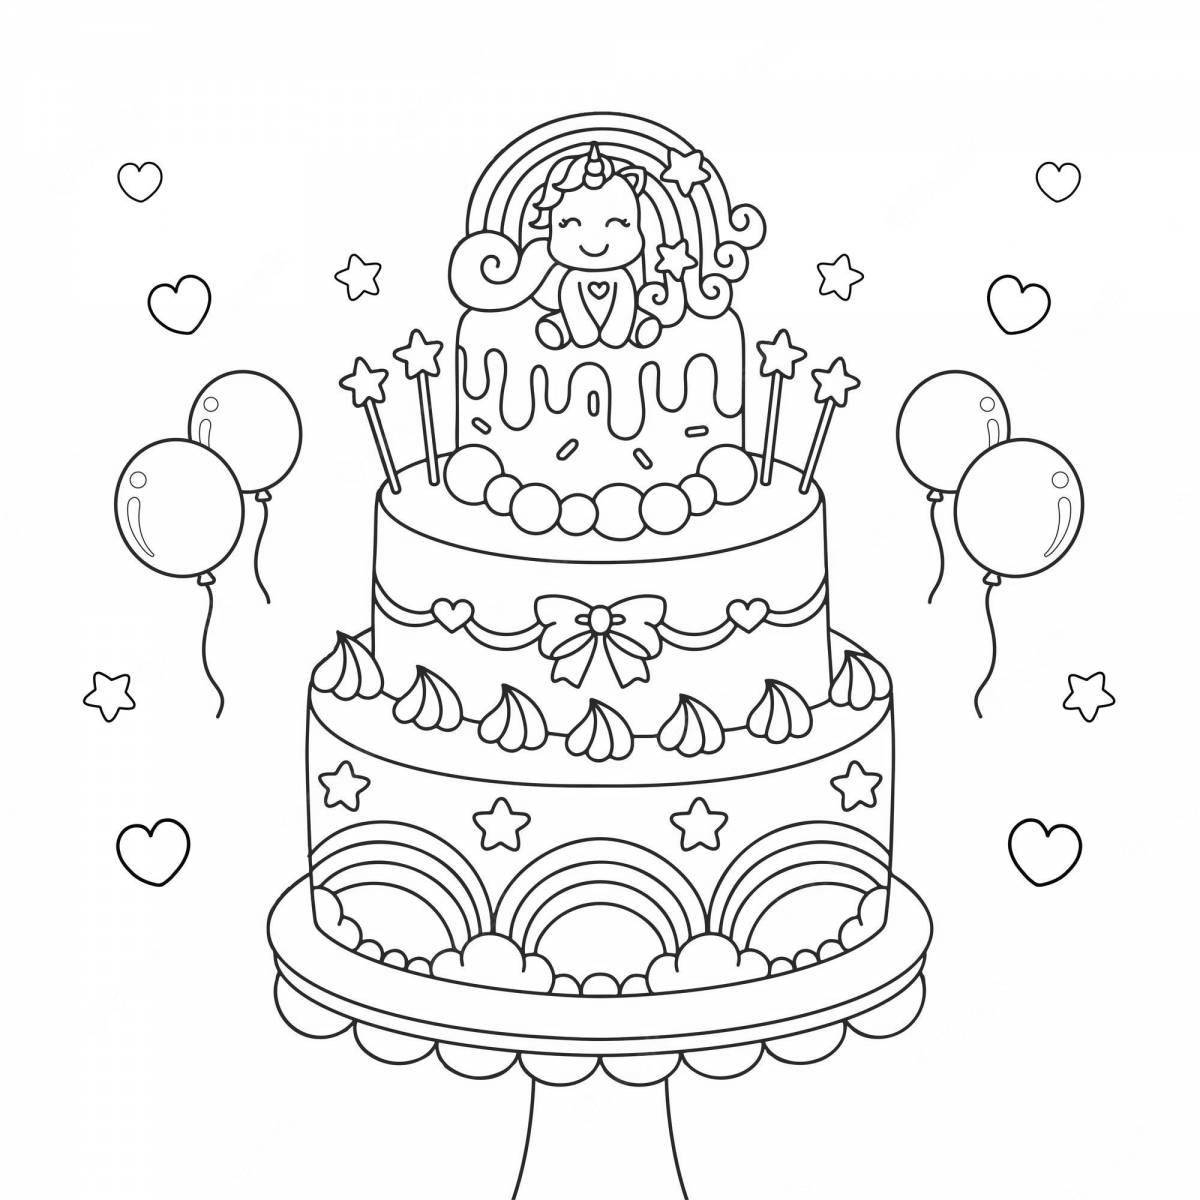 Color-frenzy cake coloring page for children 3-4 years old